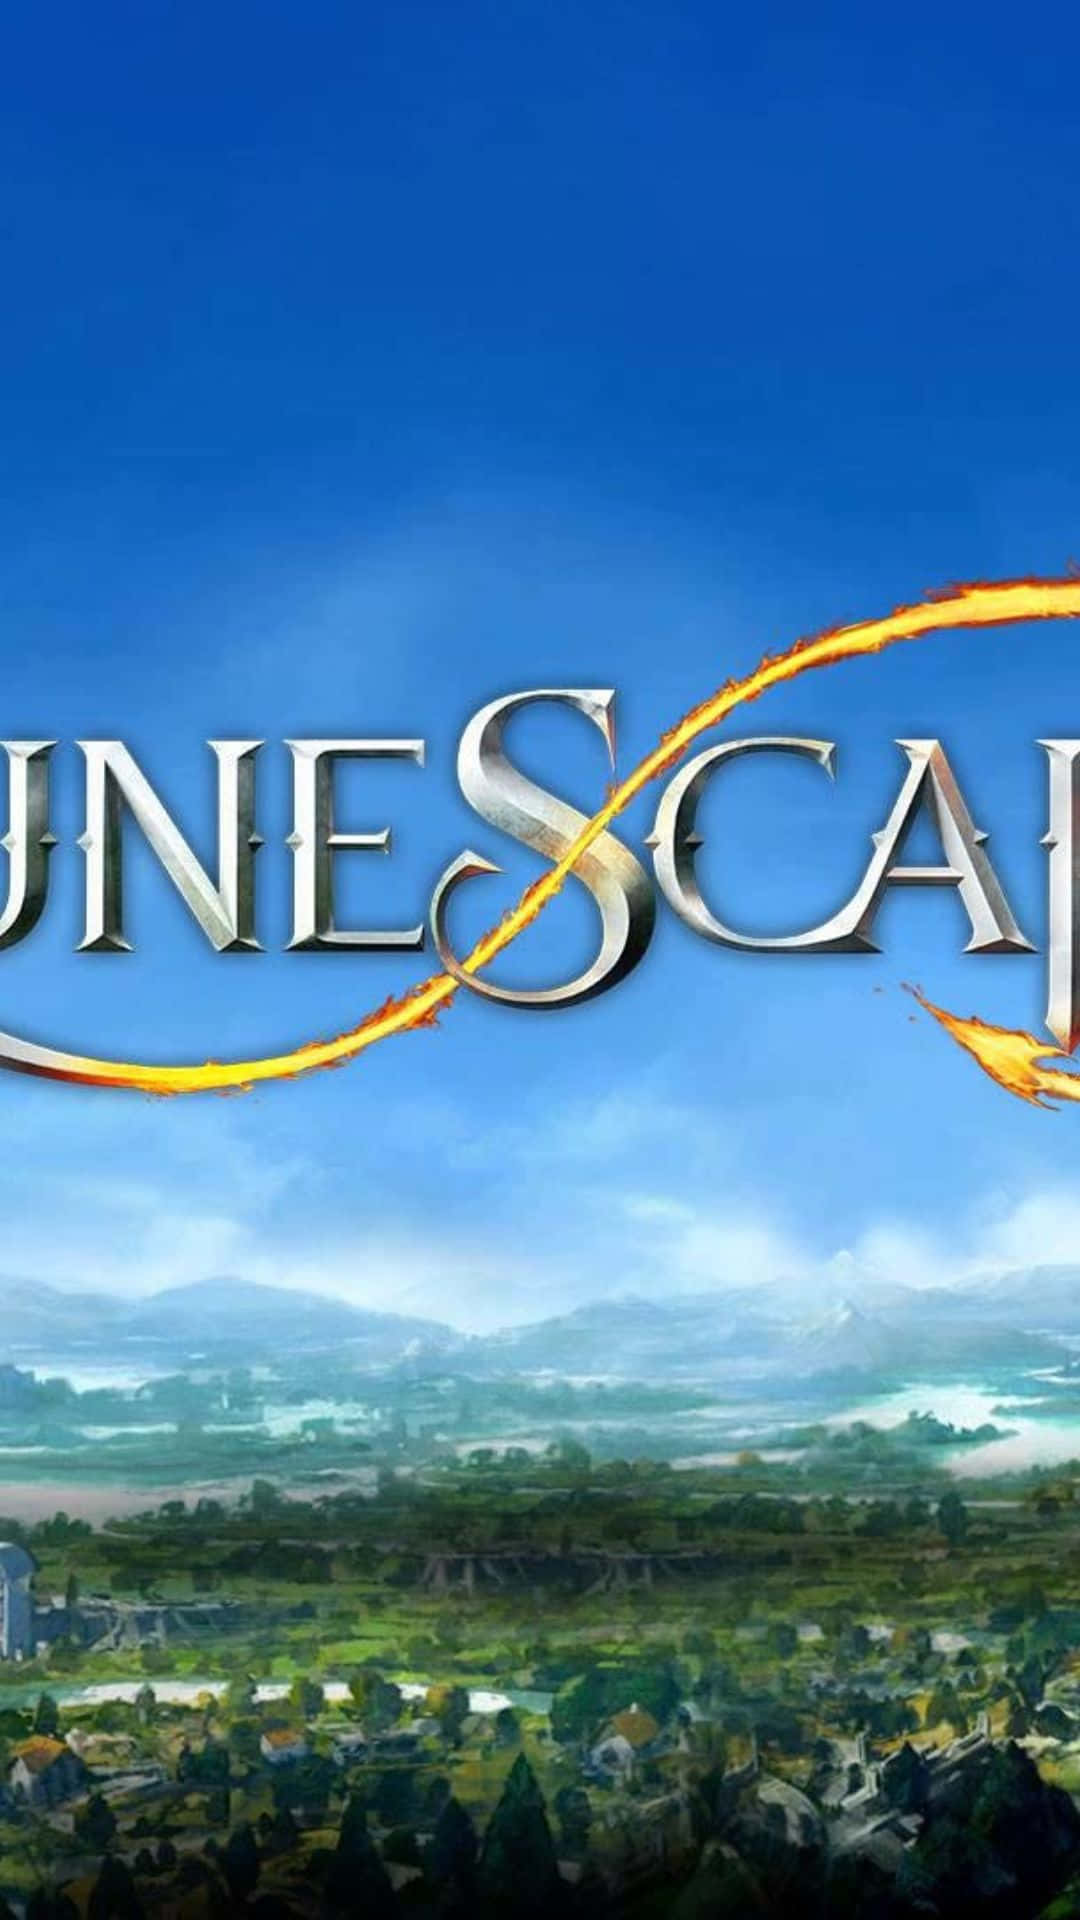 Android Runescape Oldschool – A Classic Video Game Coming to Android Devices